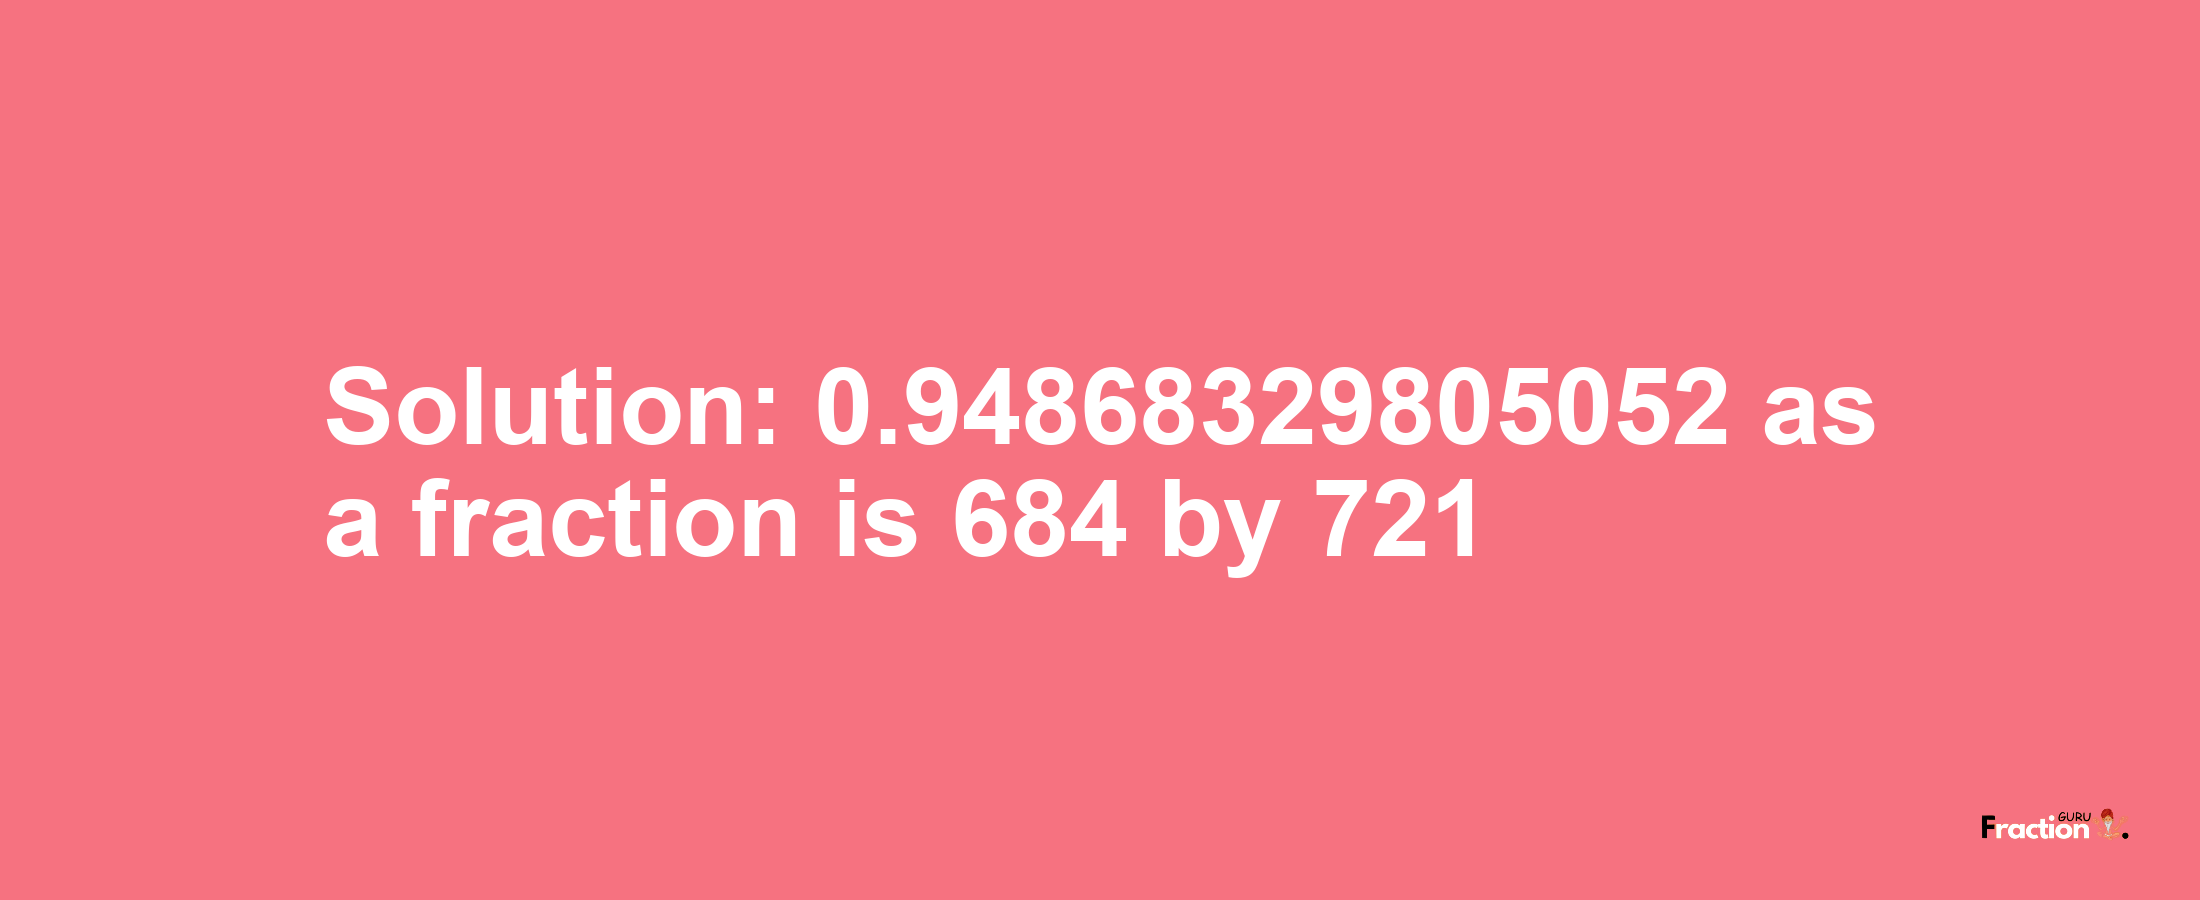 Solution:0.94868329805052 as a fraction is 684/721